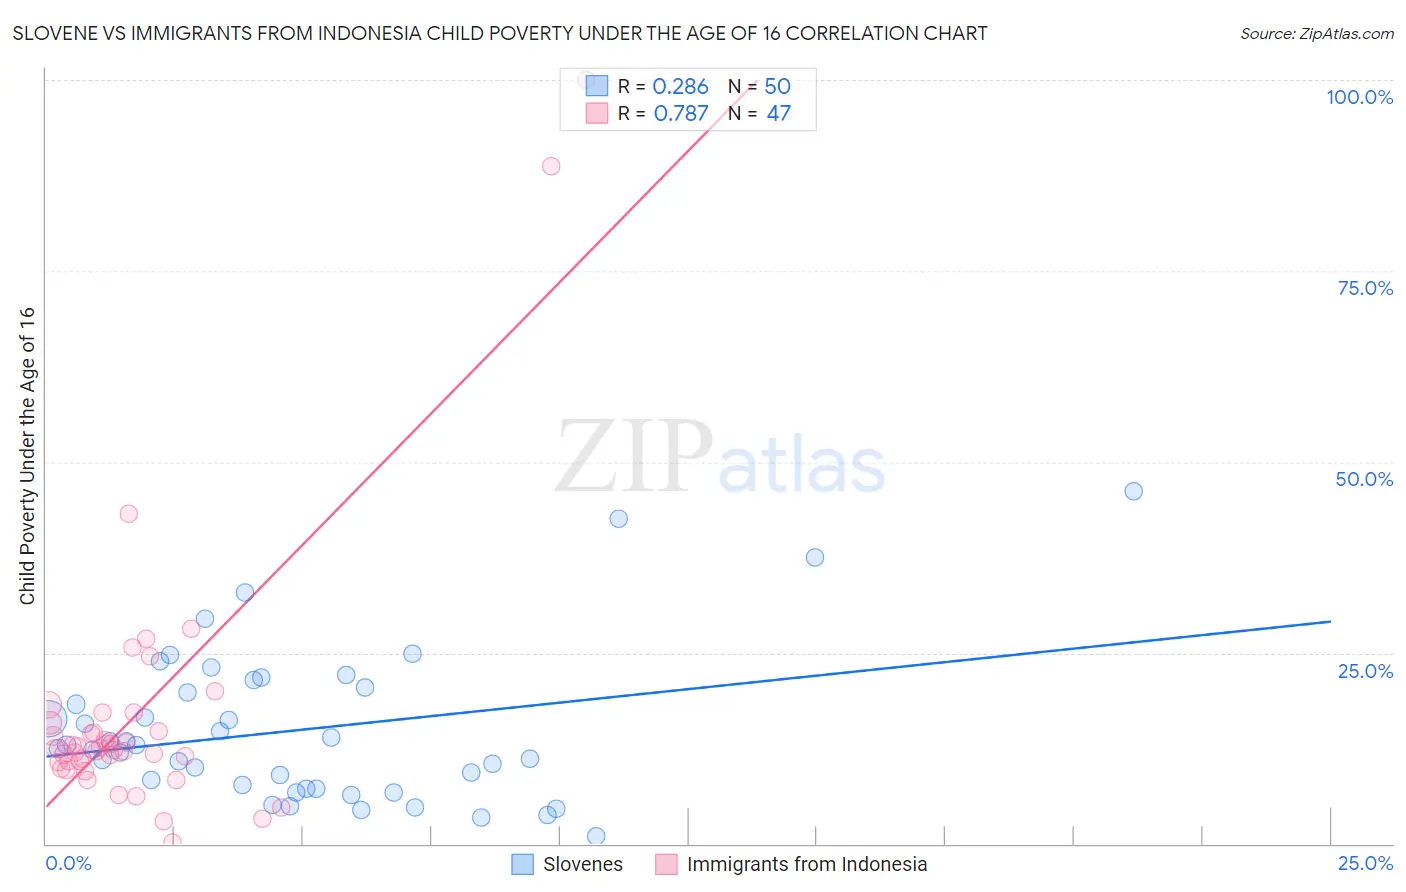 Slovene vs Immigrants from Indonesia Child Poverty Under the Age of 16